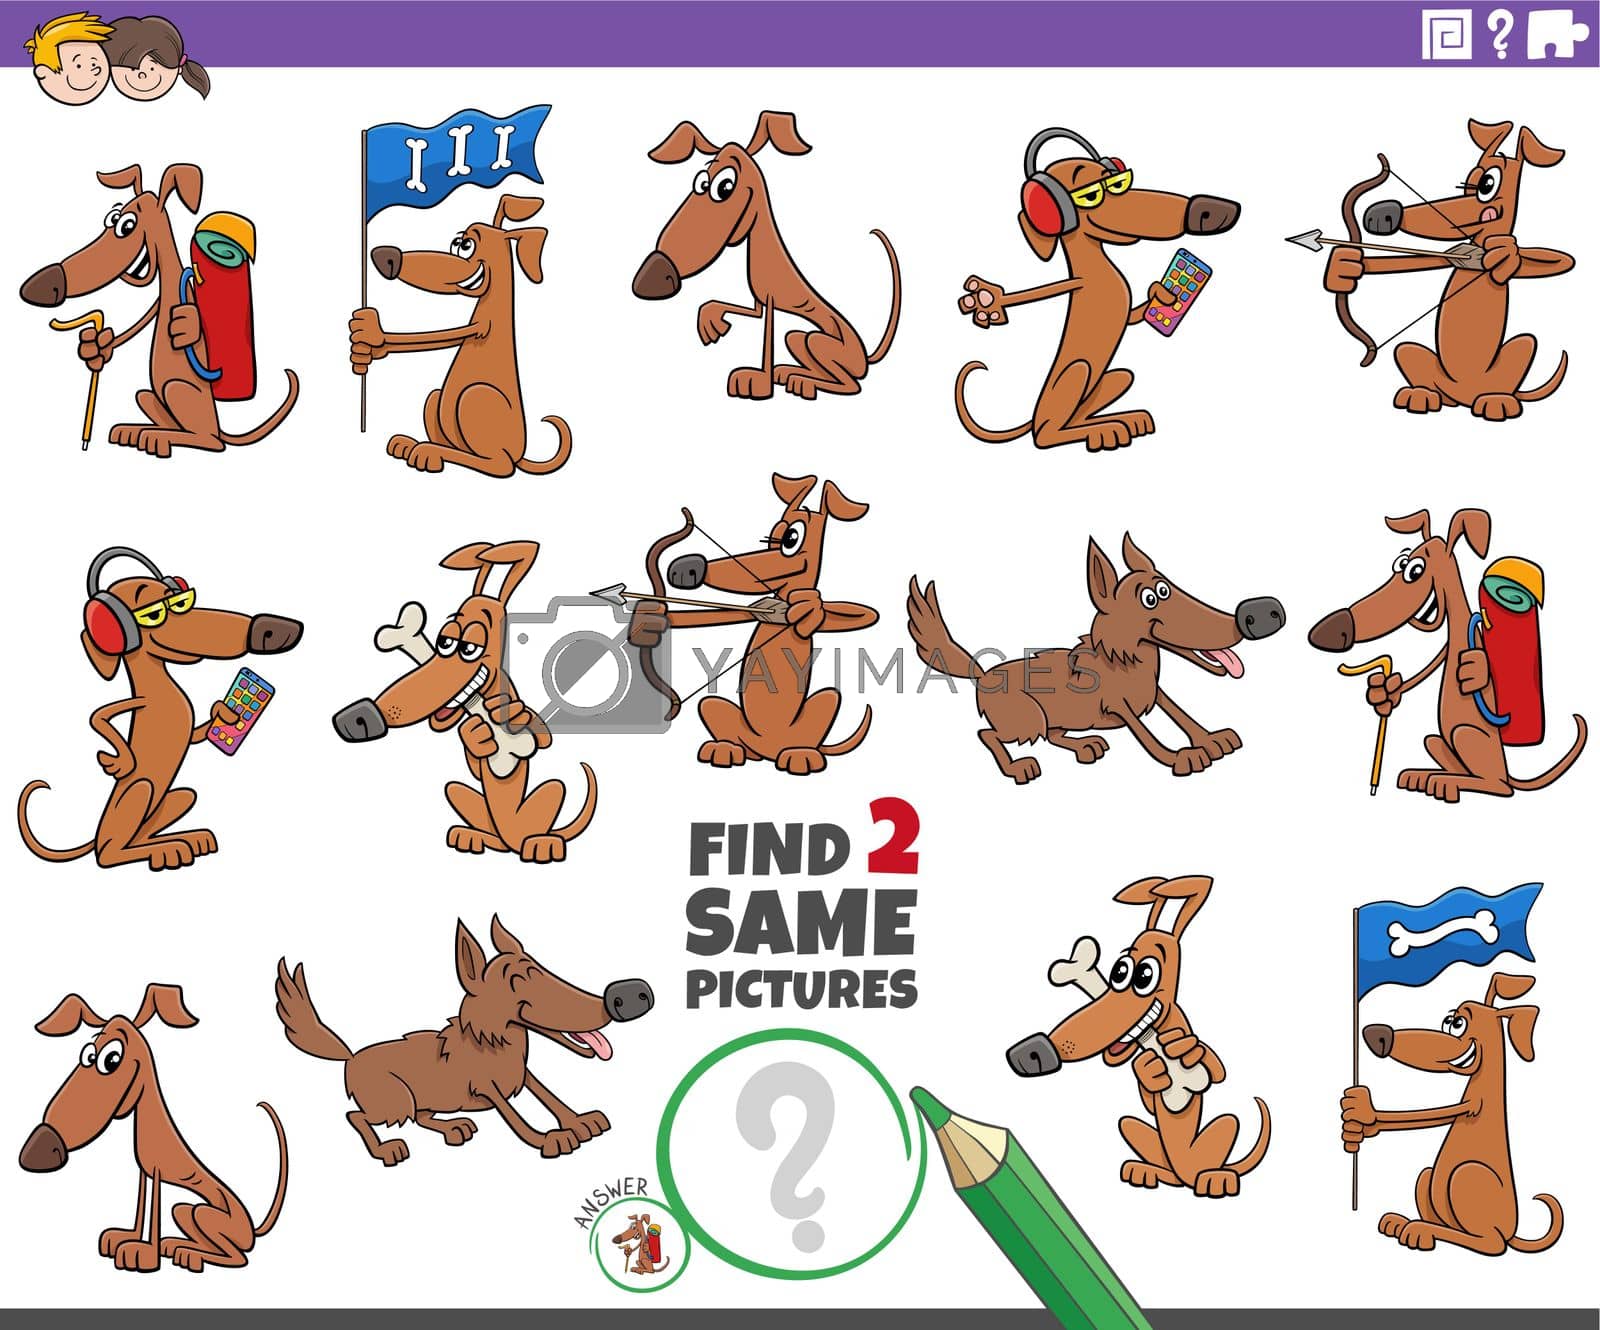 Royalty free image of find two same cartoon dog characters educational game by izakowski